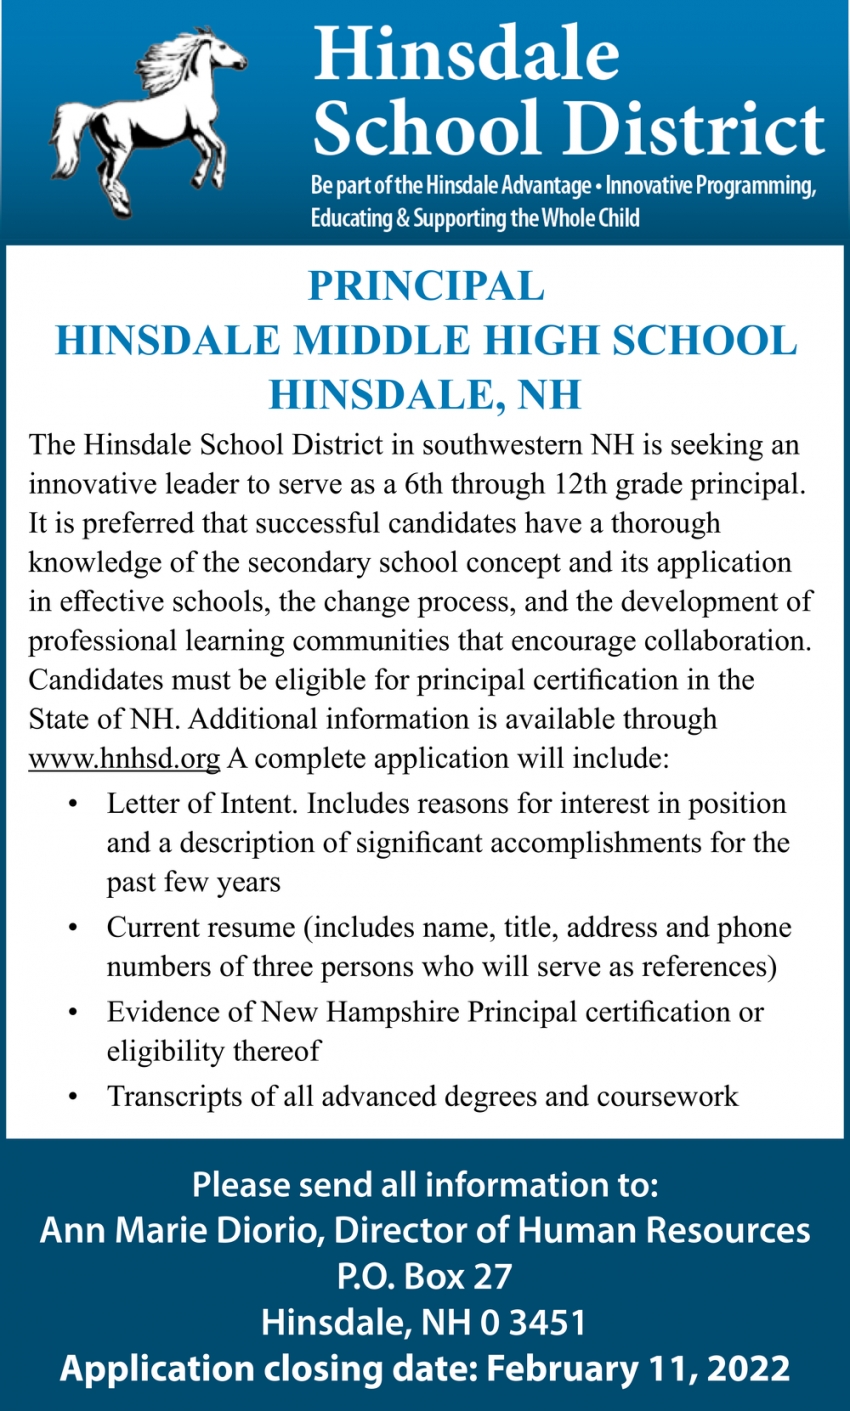 Principal Hinsdale Middle High School